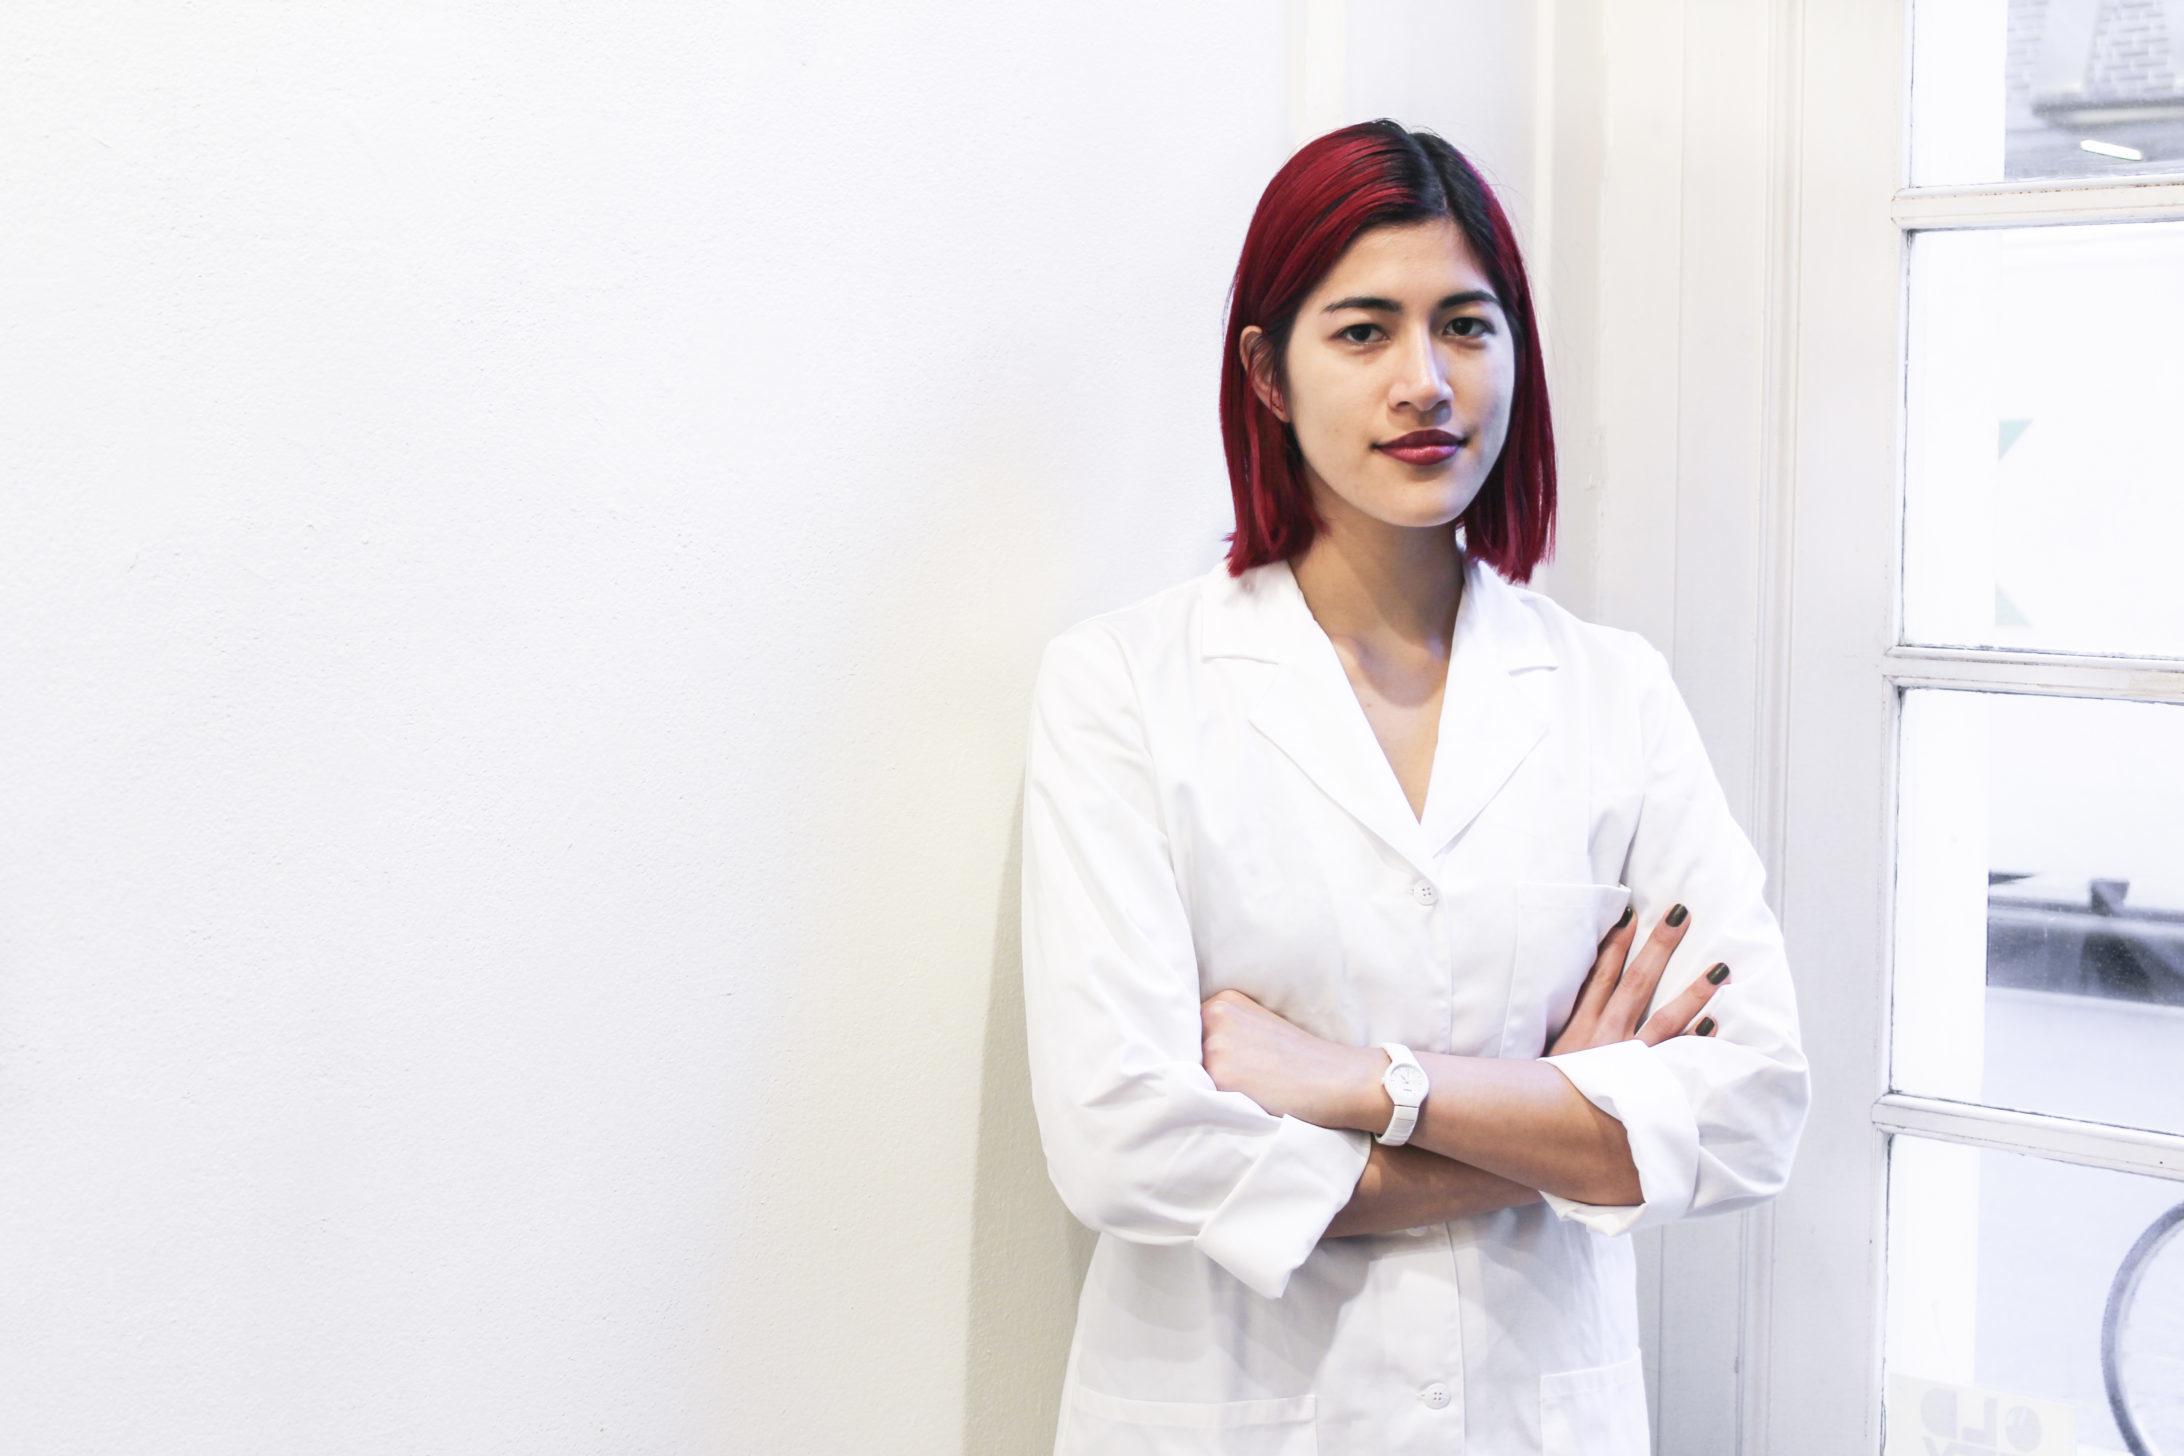 Emma Sulkowicz plays doctor in a new project for the Philadelphia Contempor...